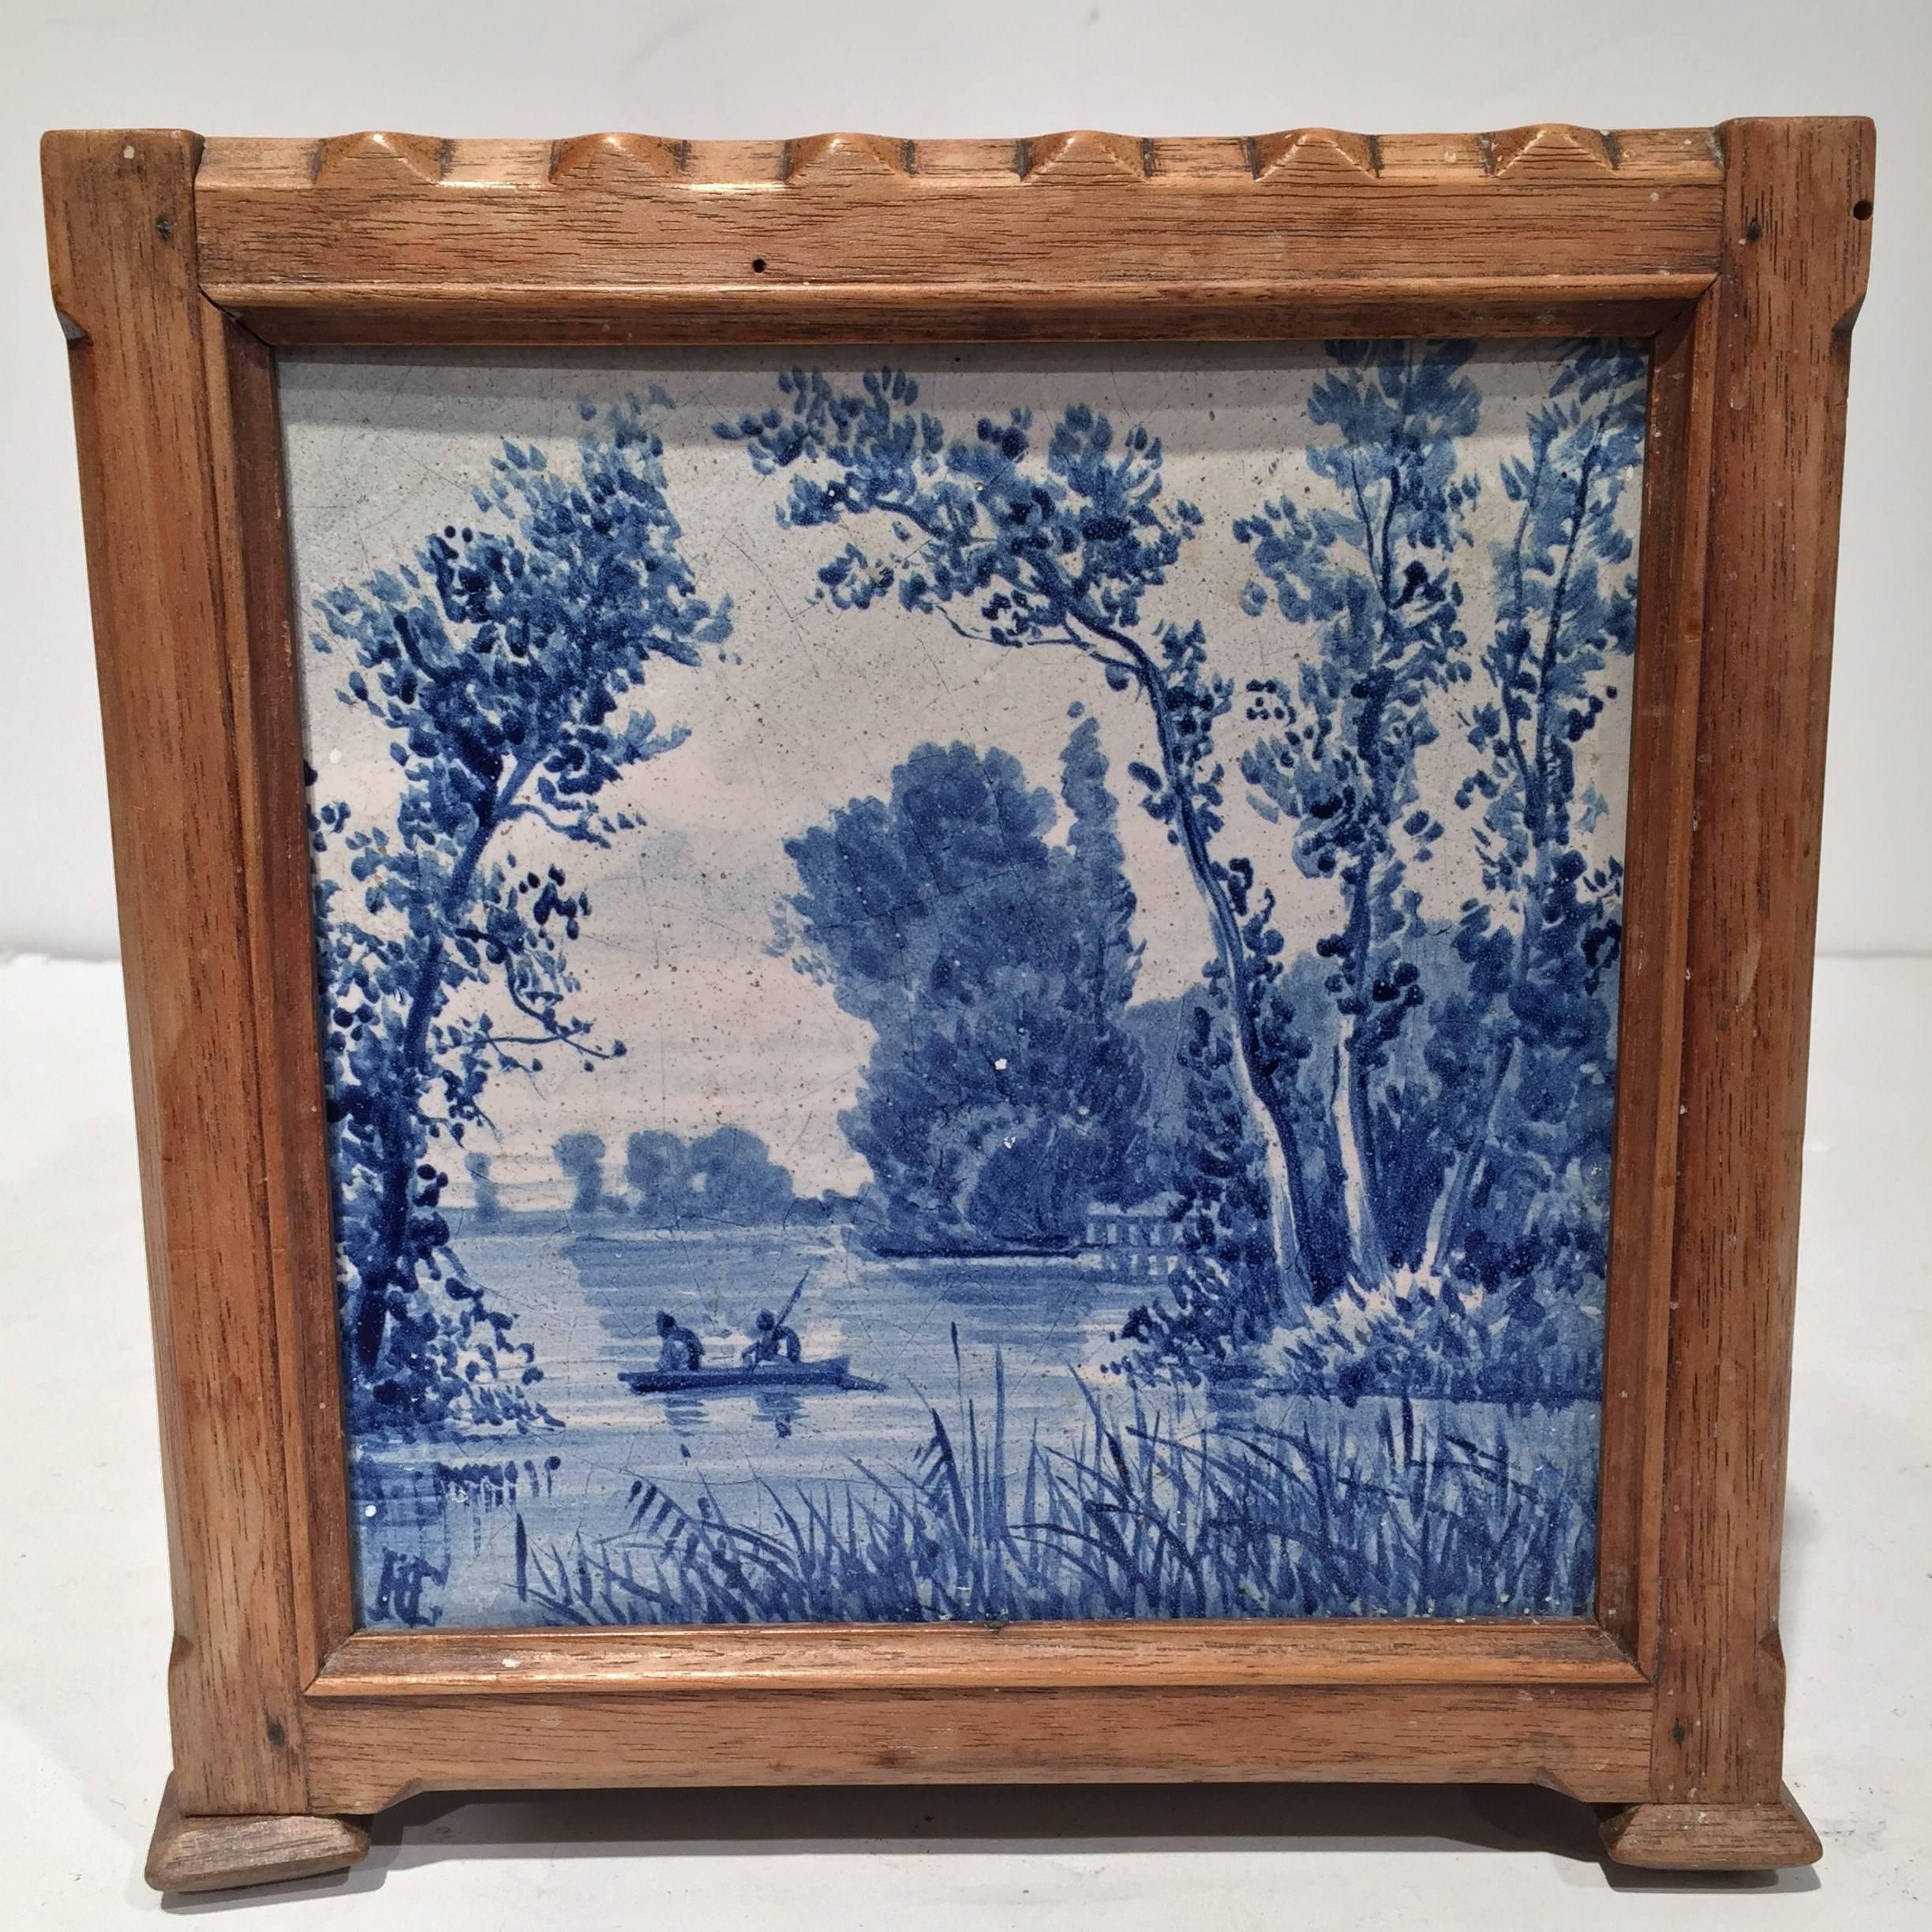 Exquisite antique cache pot from France, circa 1870 in a wooden frame. Each tile is very detailed with a different pastoral and nautical scene on each one. Very good condition with original zinc liner inside.